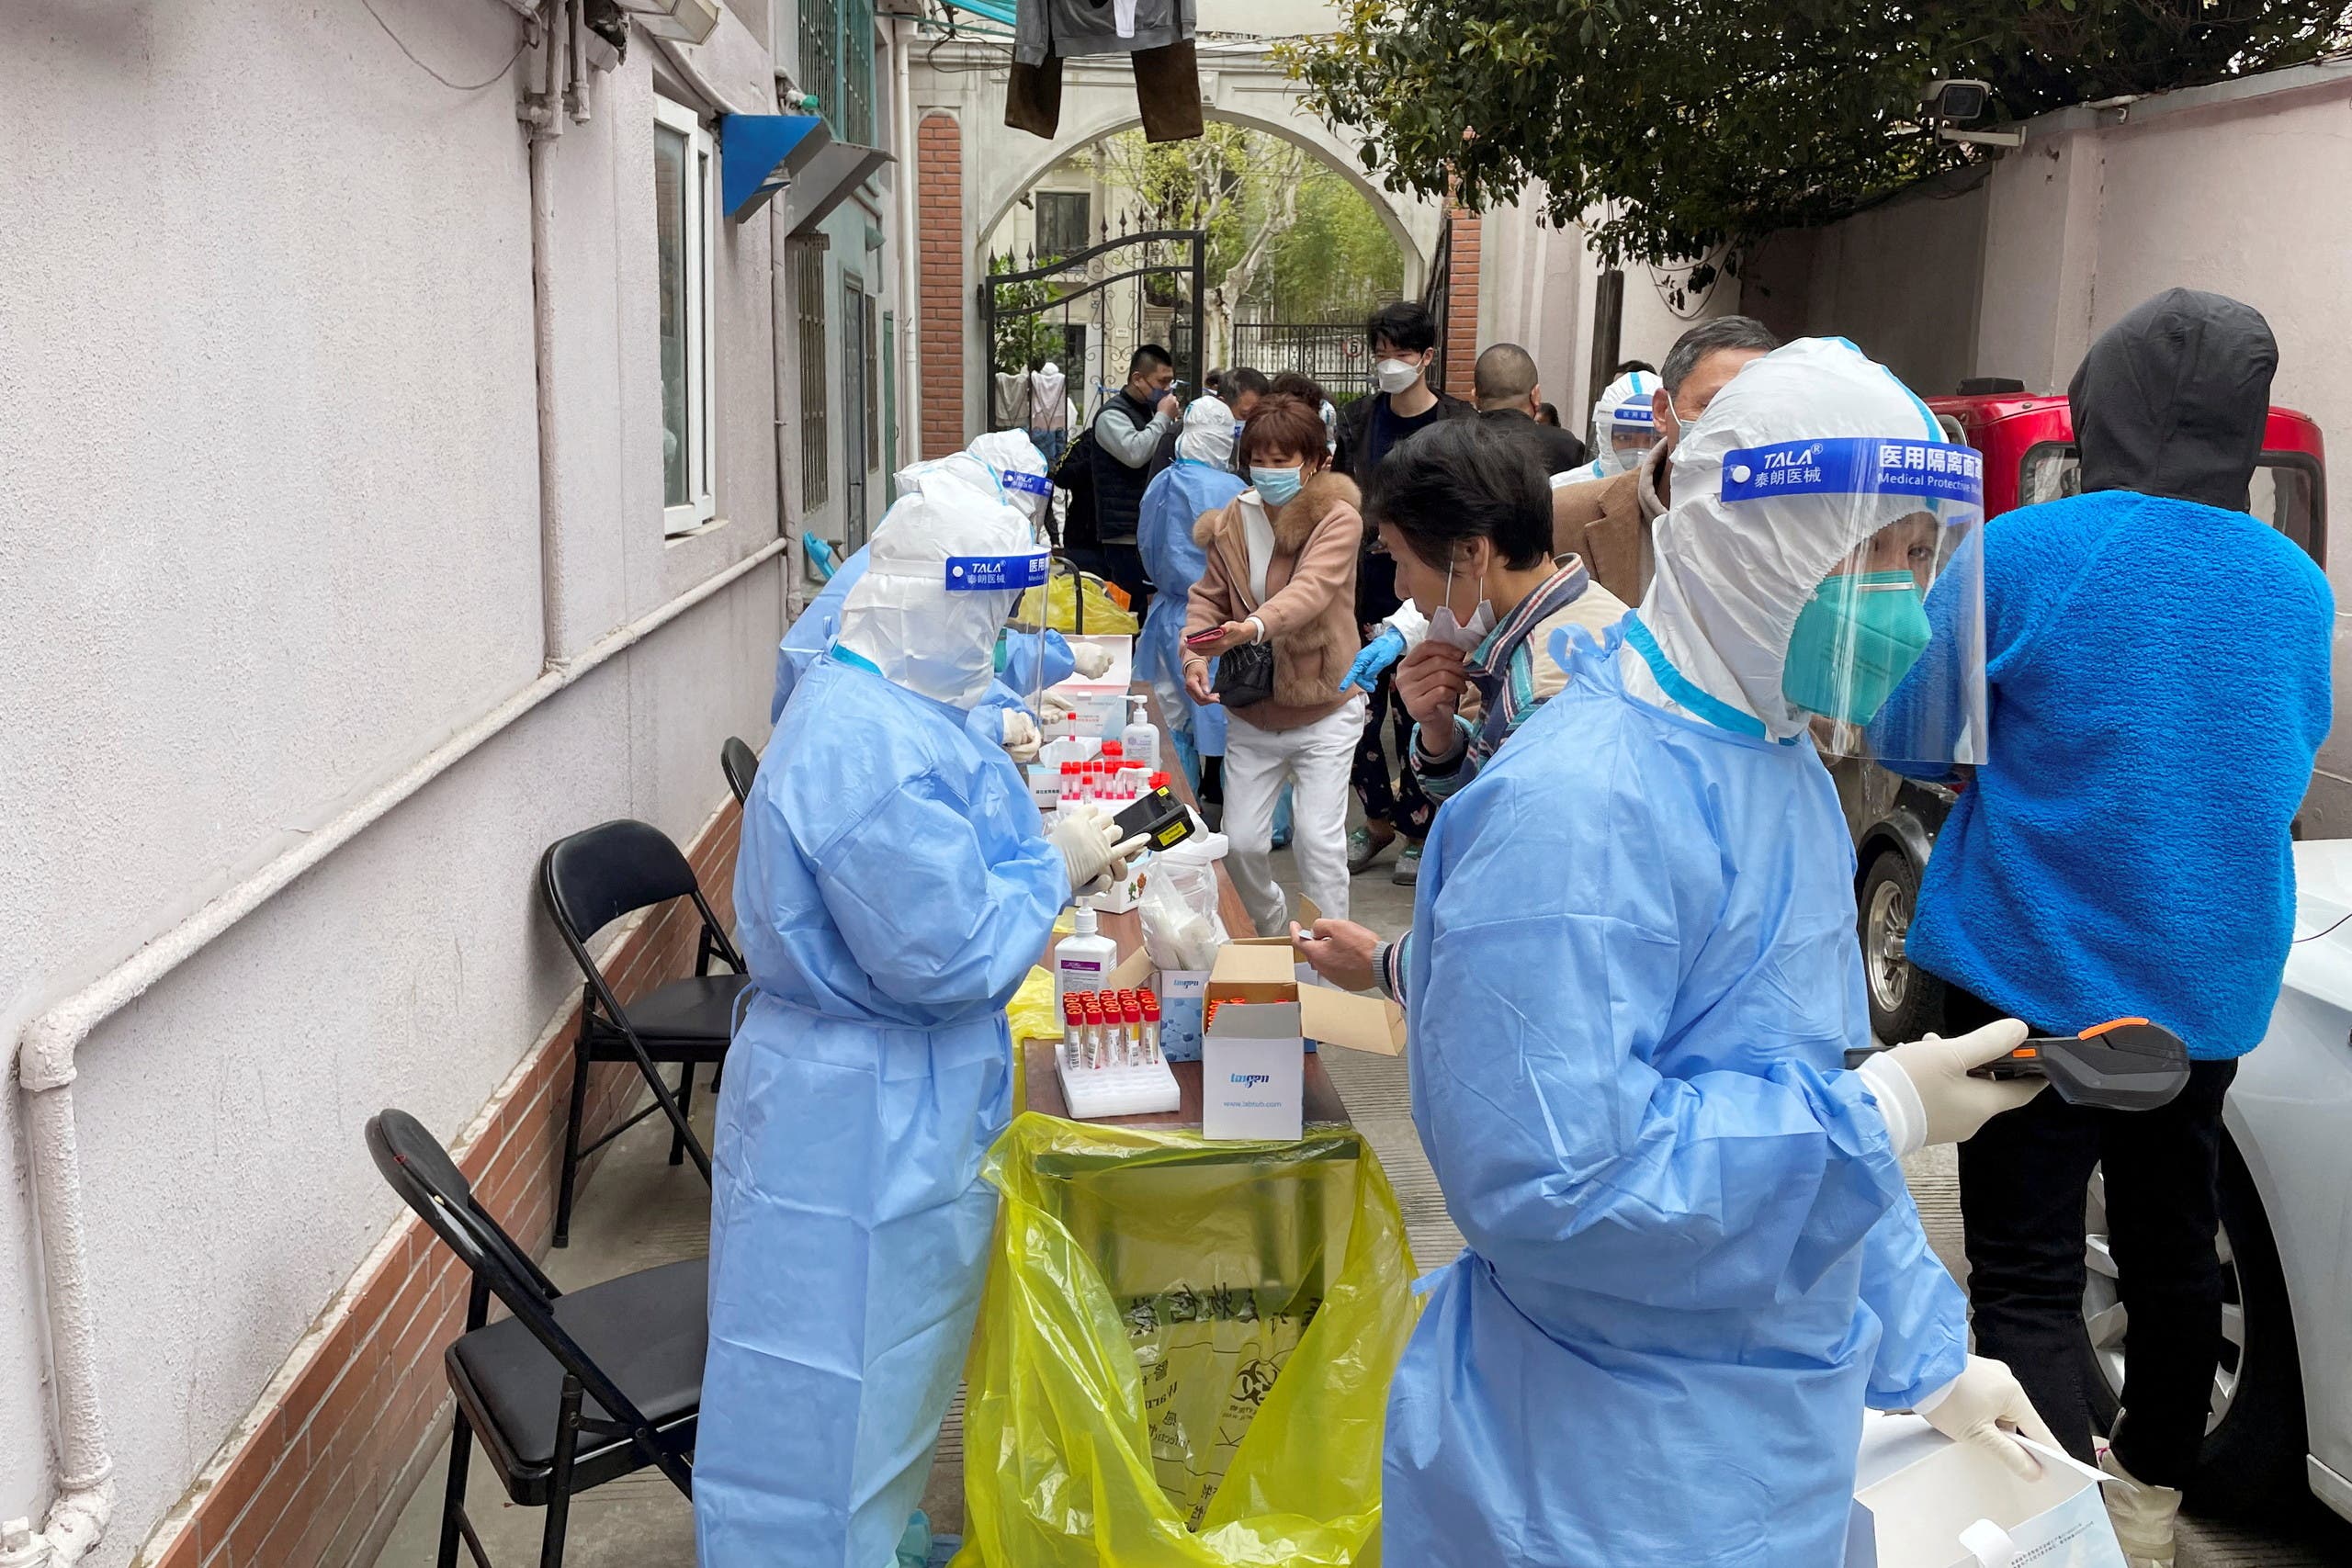 Medical workers in protective suits administer nucleic acid testing for residents in a residential compound, as the second stage of a two-stage lockdown to curb the spread of the coronavirus disease (COVID-19) begins in Shanghai, China April 1, 2022. (File photo: Reuters)